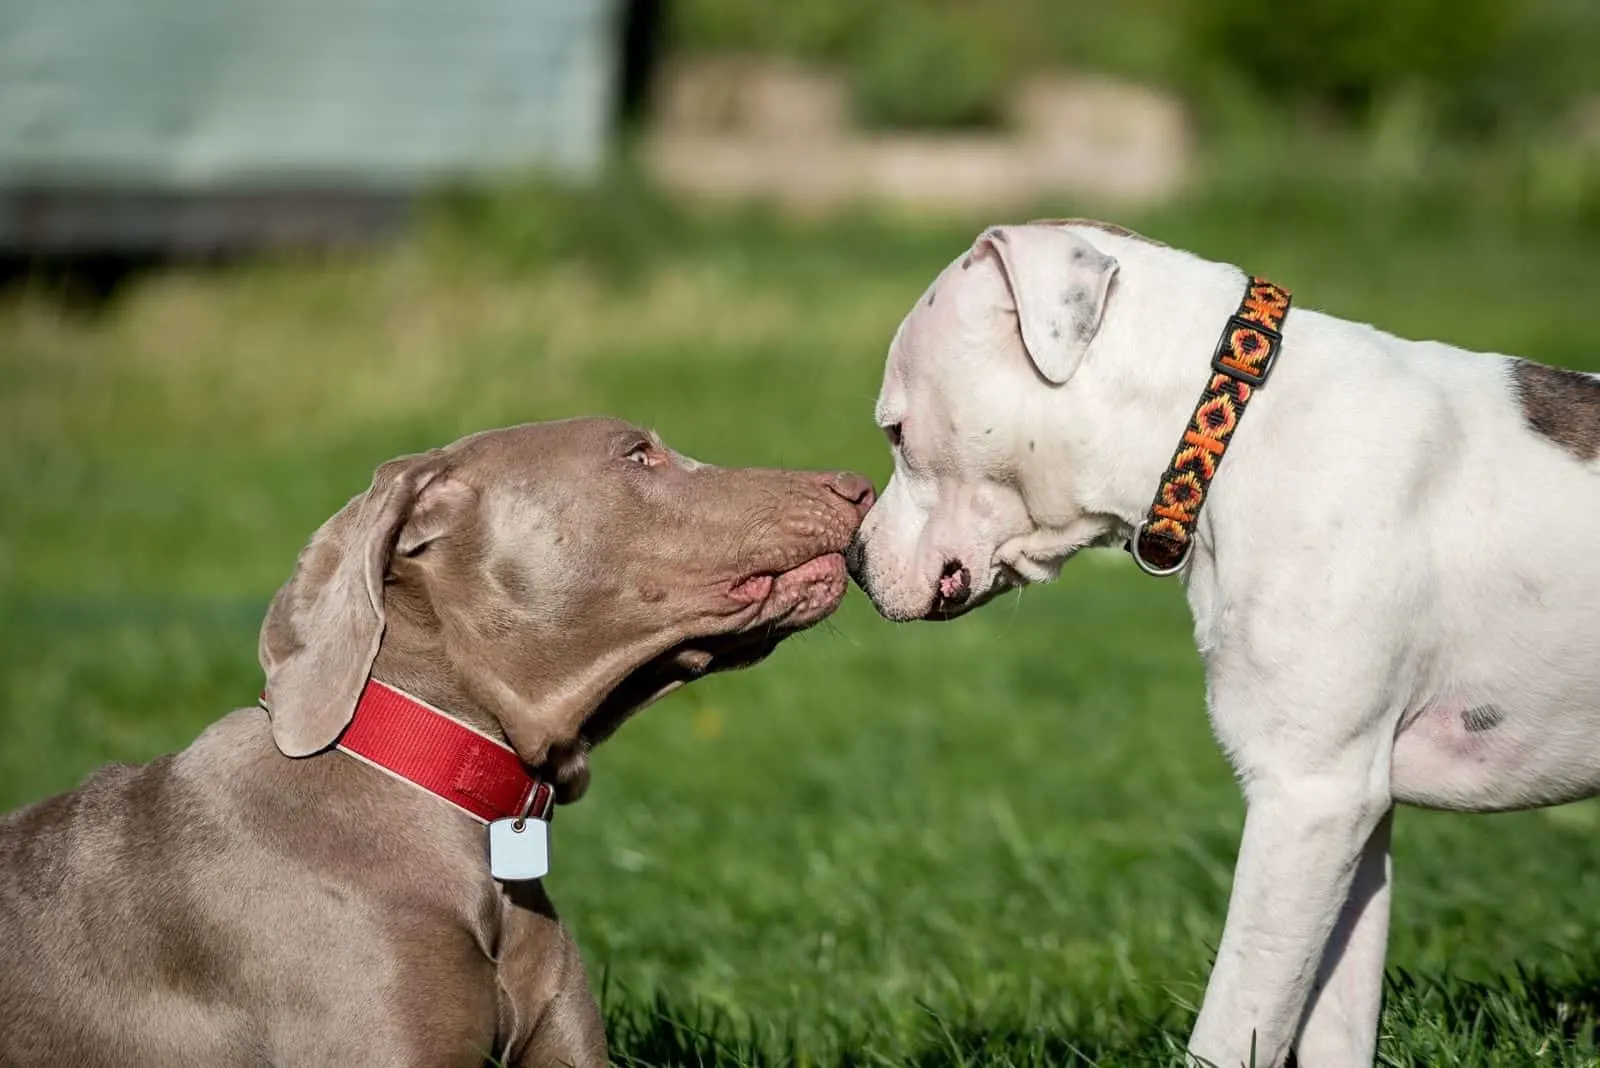 Weimaraner and pitbull kissing and playing outdoors